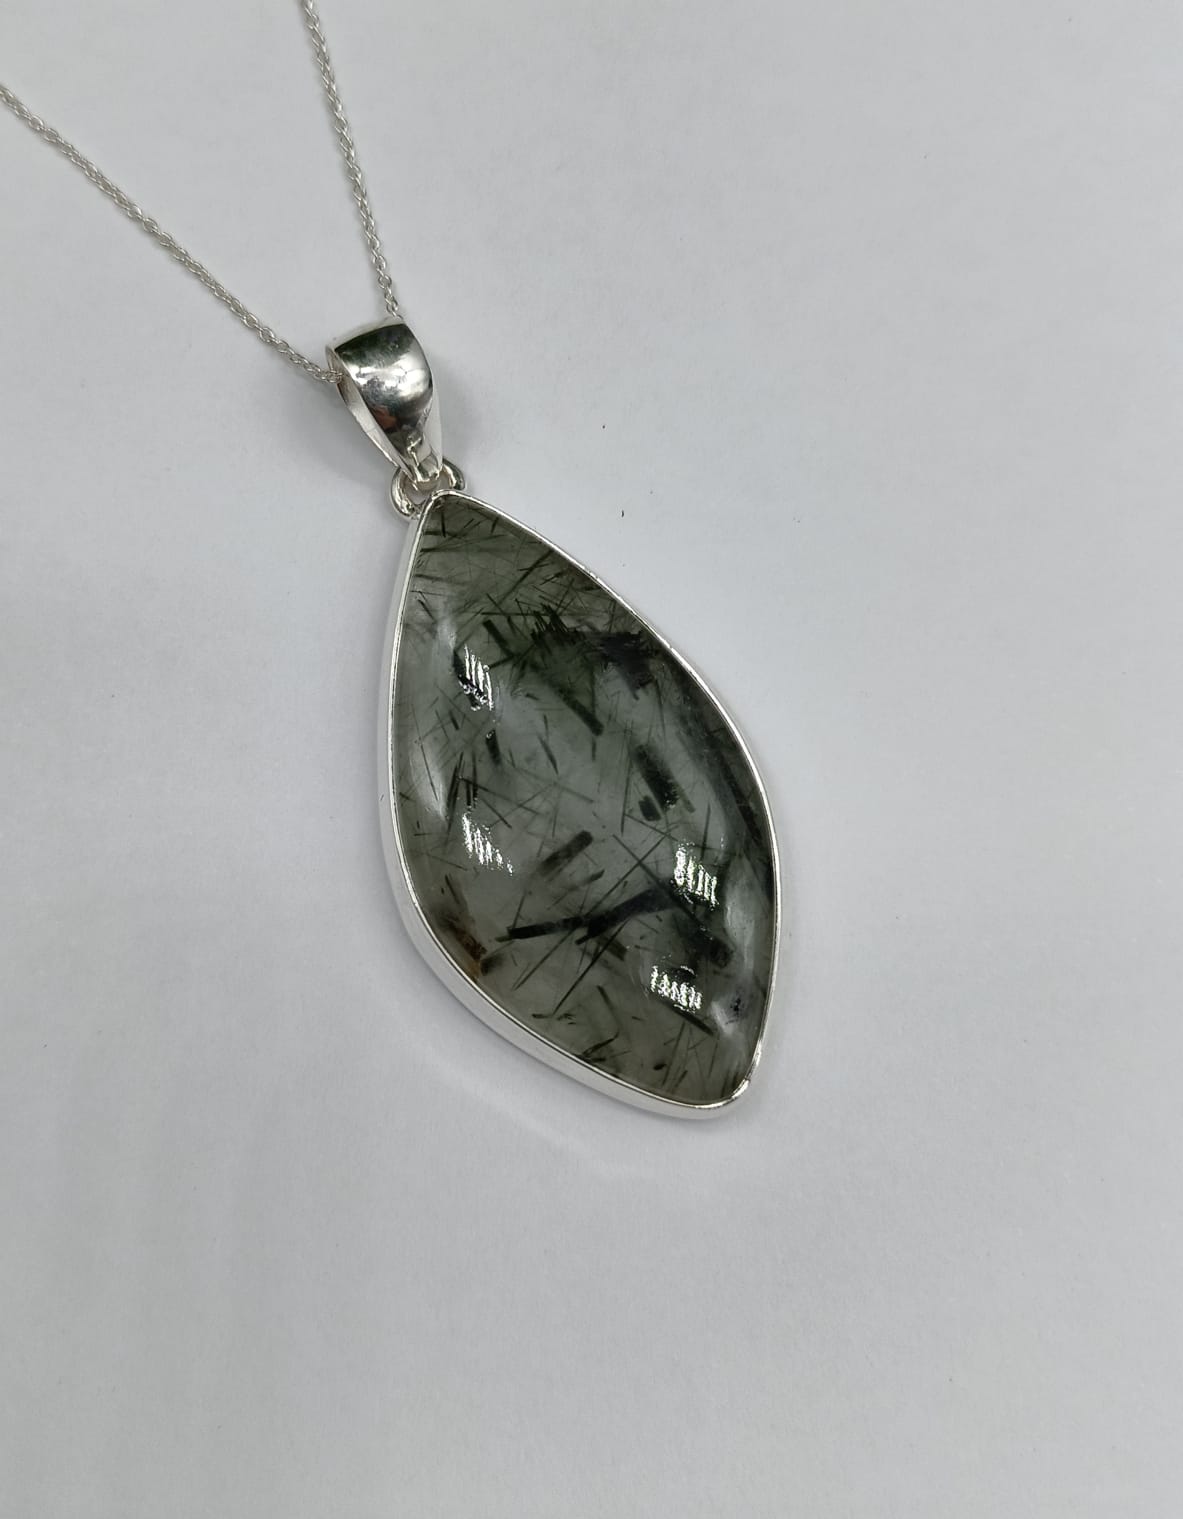 Actinolite 925 Sterling Silver Pendant 45x25mm (Including Silver Chain)
